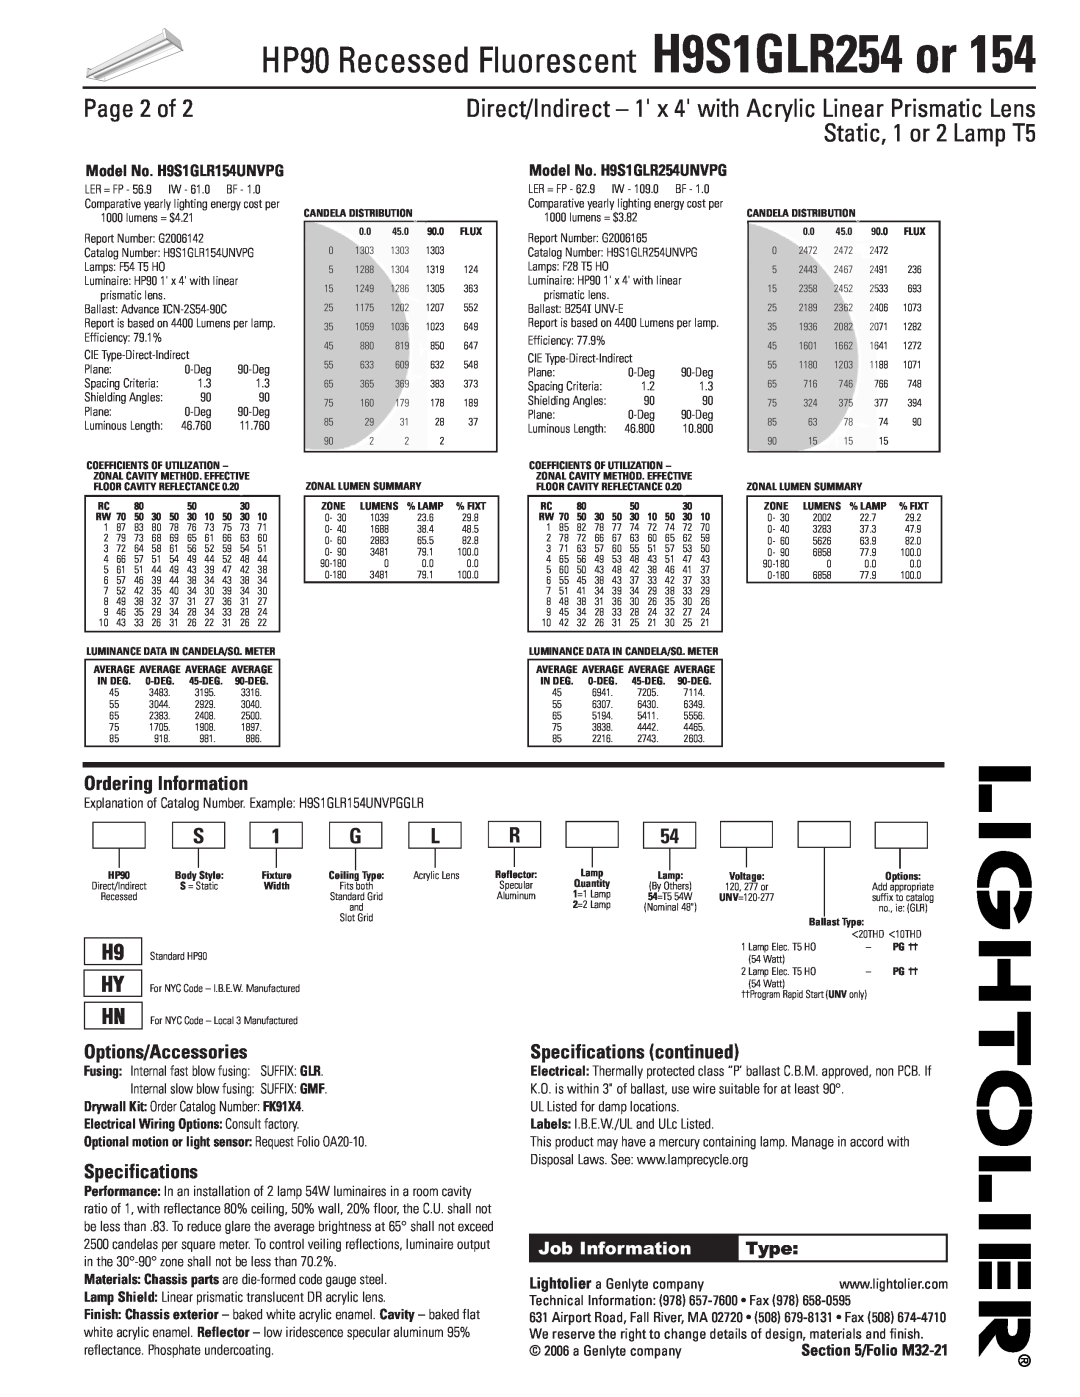 Lightolier H9S1GLR254 Page 2 of, Ordering Information, Options/Accessories, Specifications continued, Folio M32-21 